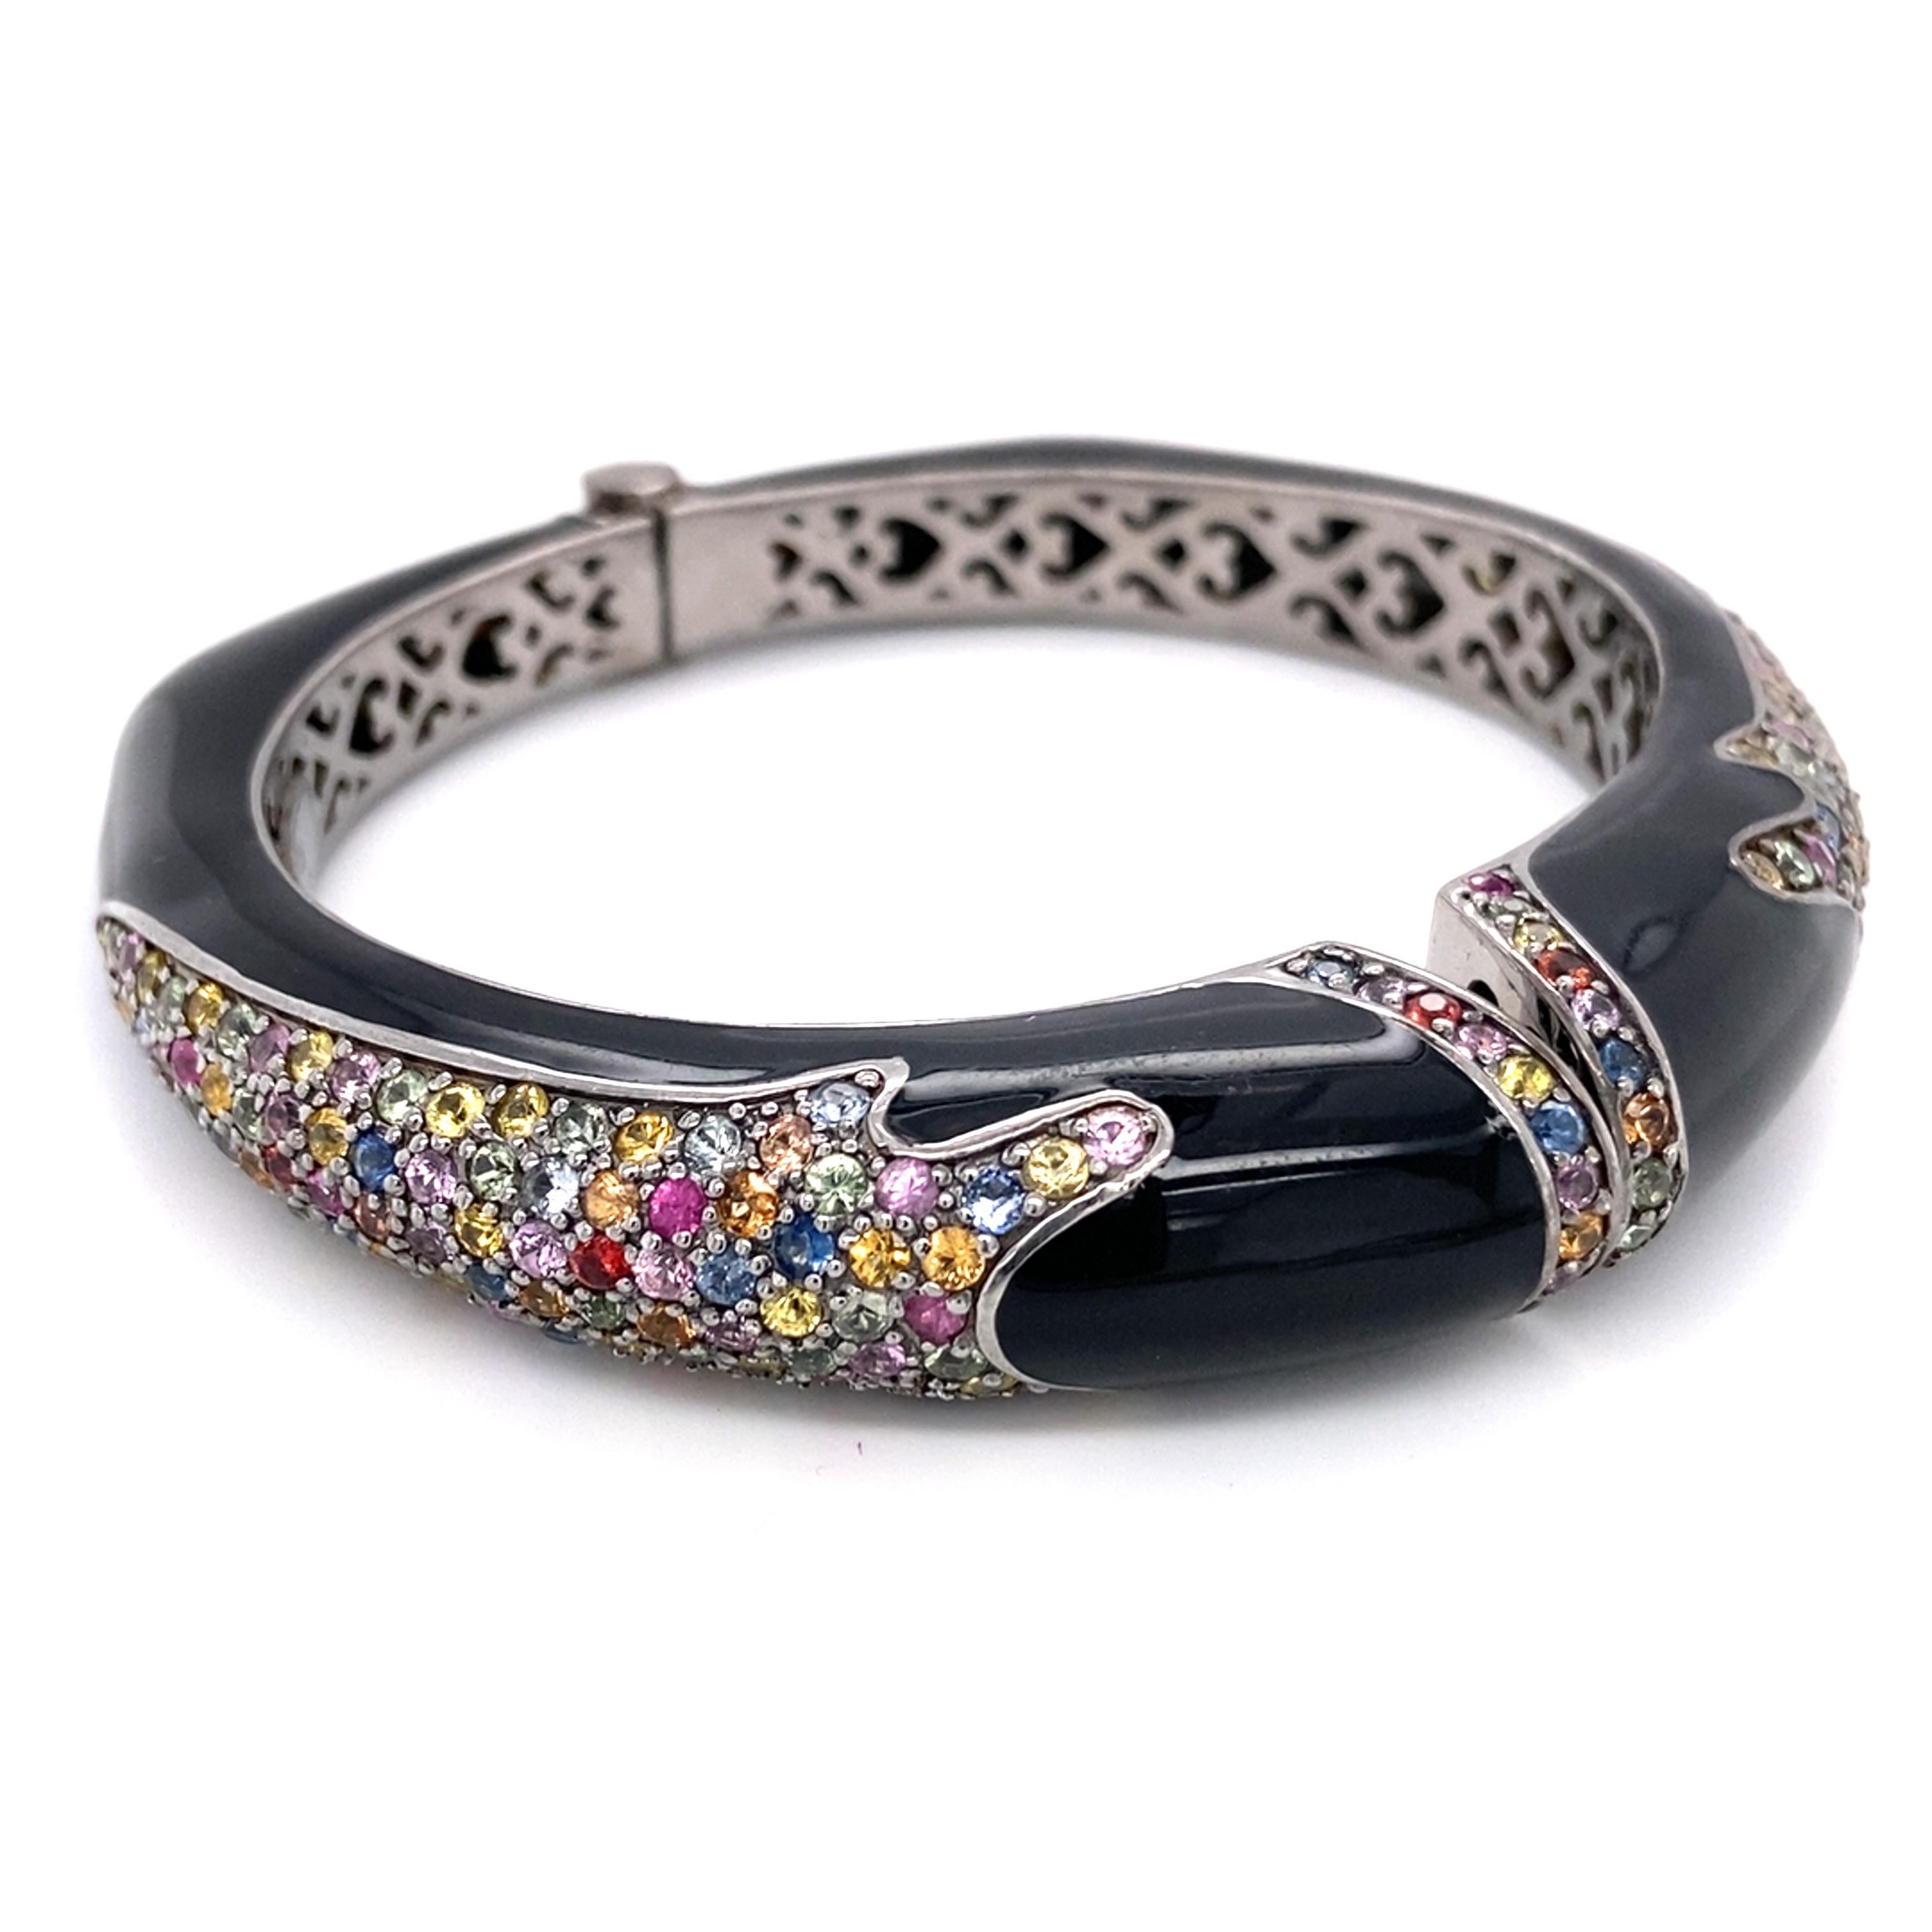 Item Details: 
Metal: Sterling Silver
Weight: 72 grams 
Measurements: 2.5 inches across x 2 inches high (Inside Bracelet)

Item Features: 
This beautiful multi-gem stone bangle features 5 carats of assorted sapphire, topaz, and quartz all crafted in